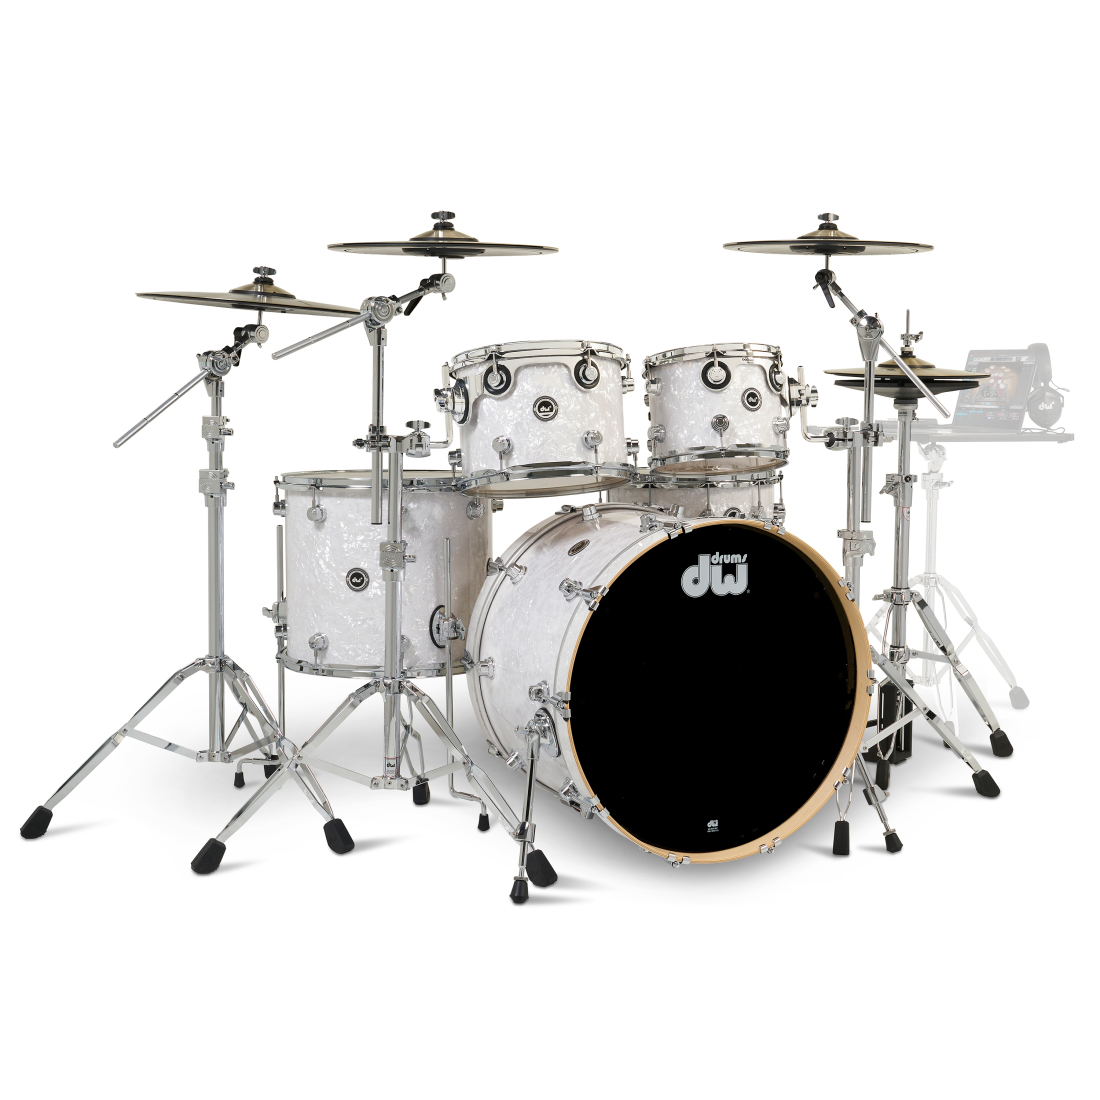 DWe 5-Piece Drumset with Cymbals and Hardware - White Marine Pearl